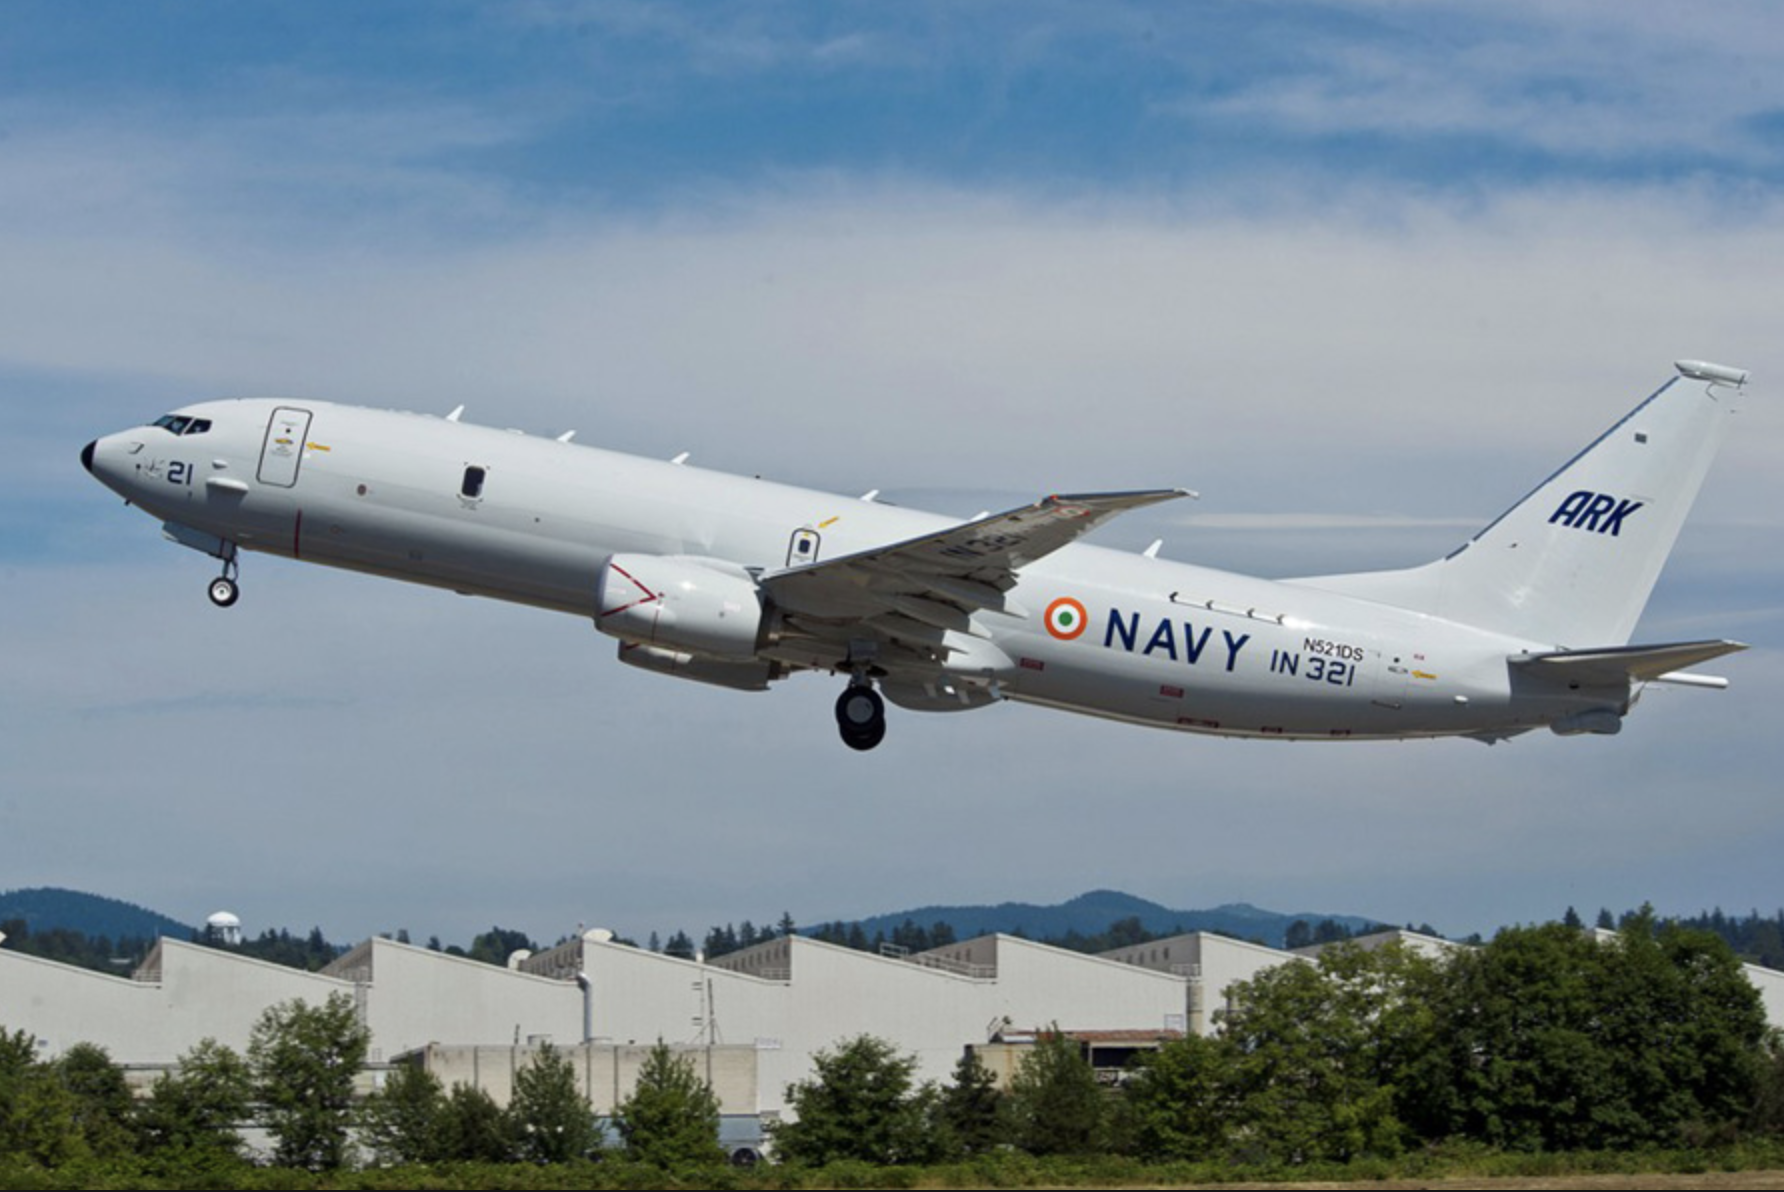 Indian Navy's P8I Carrying Out Surveillance Sorties in Gulf of Aden